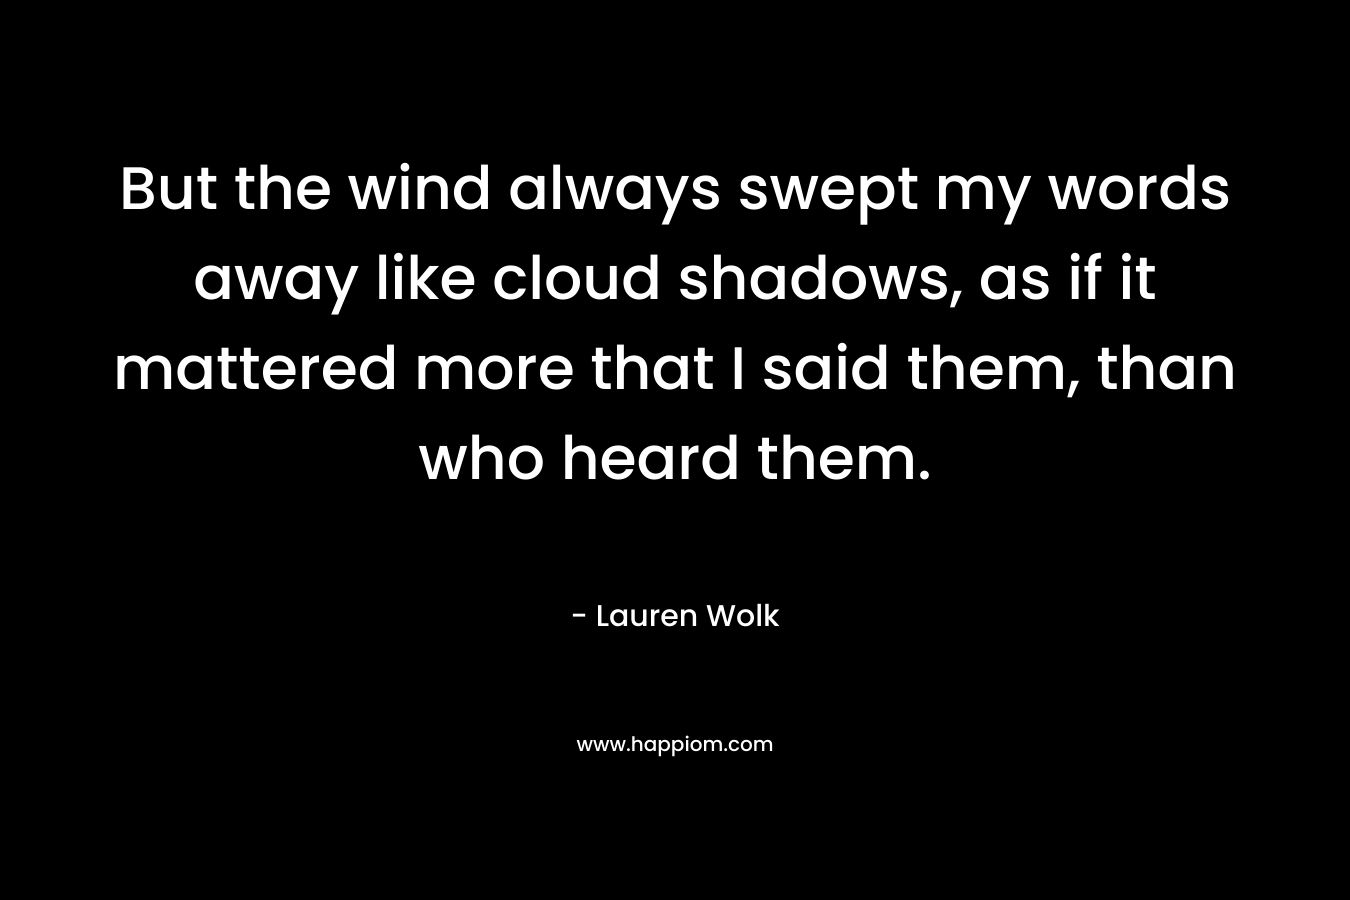 But the wind always swept my words away like cloud shadows, as if it mattered more that I said them, than who heard them. – Lauren Wolk